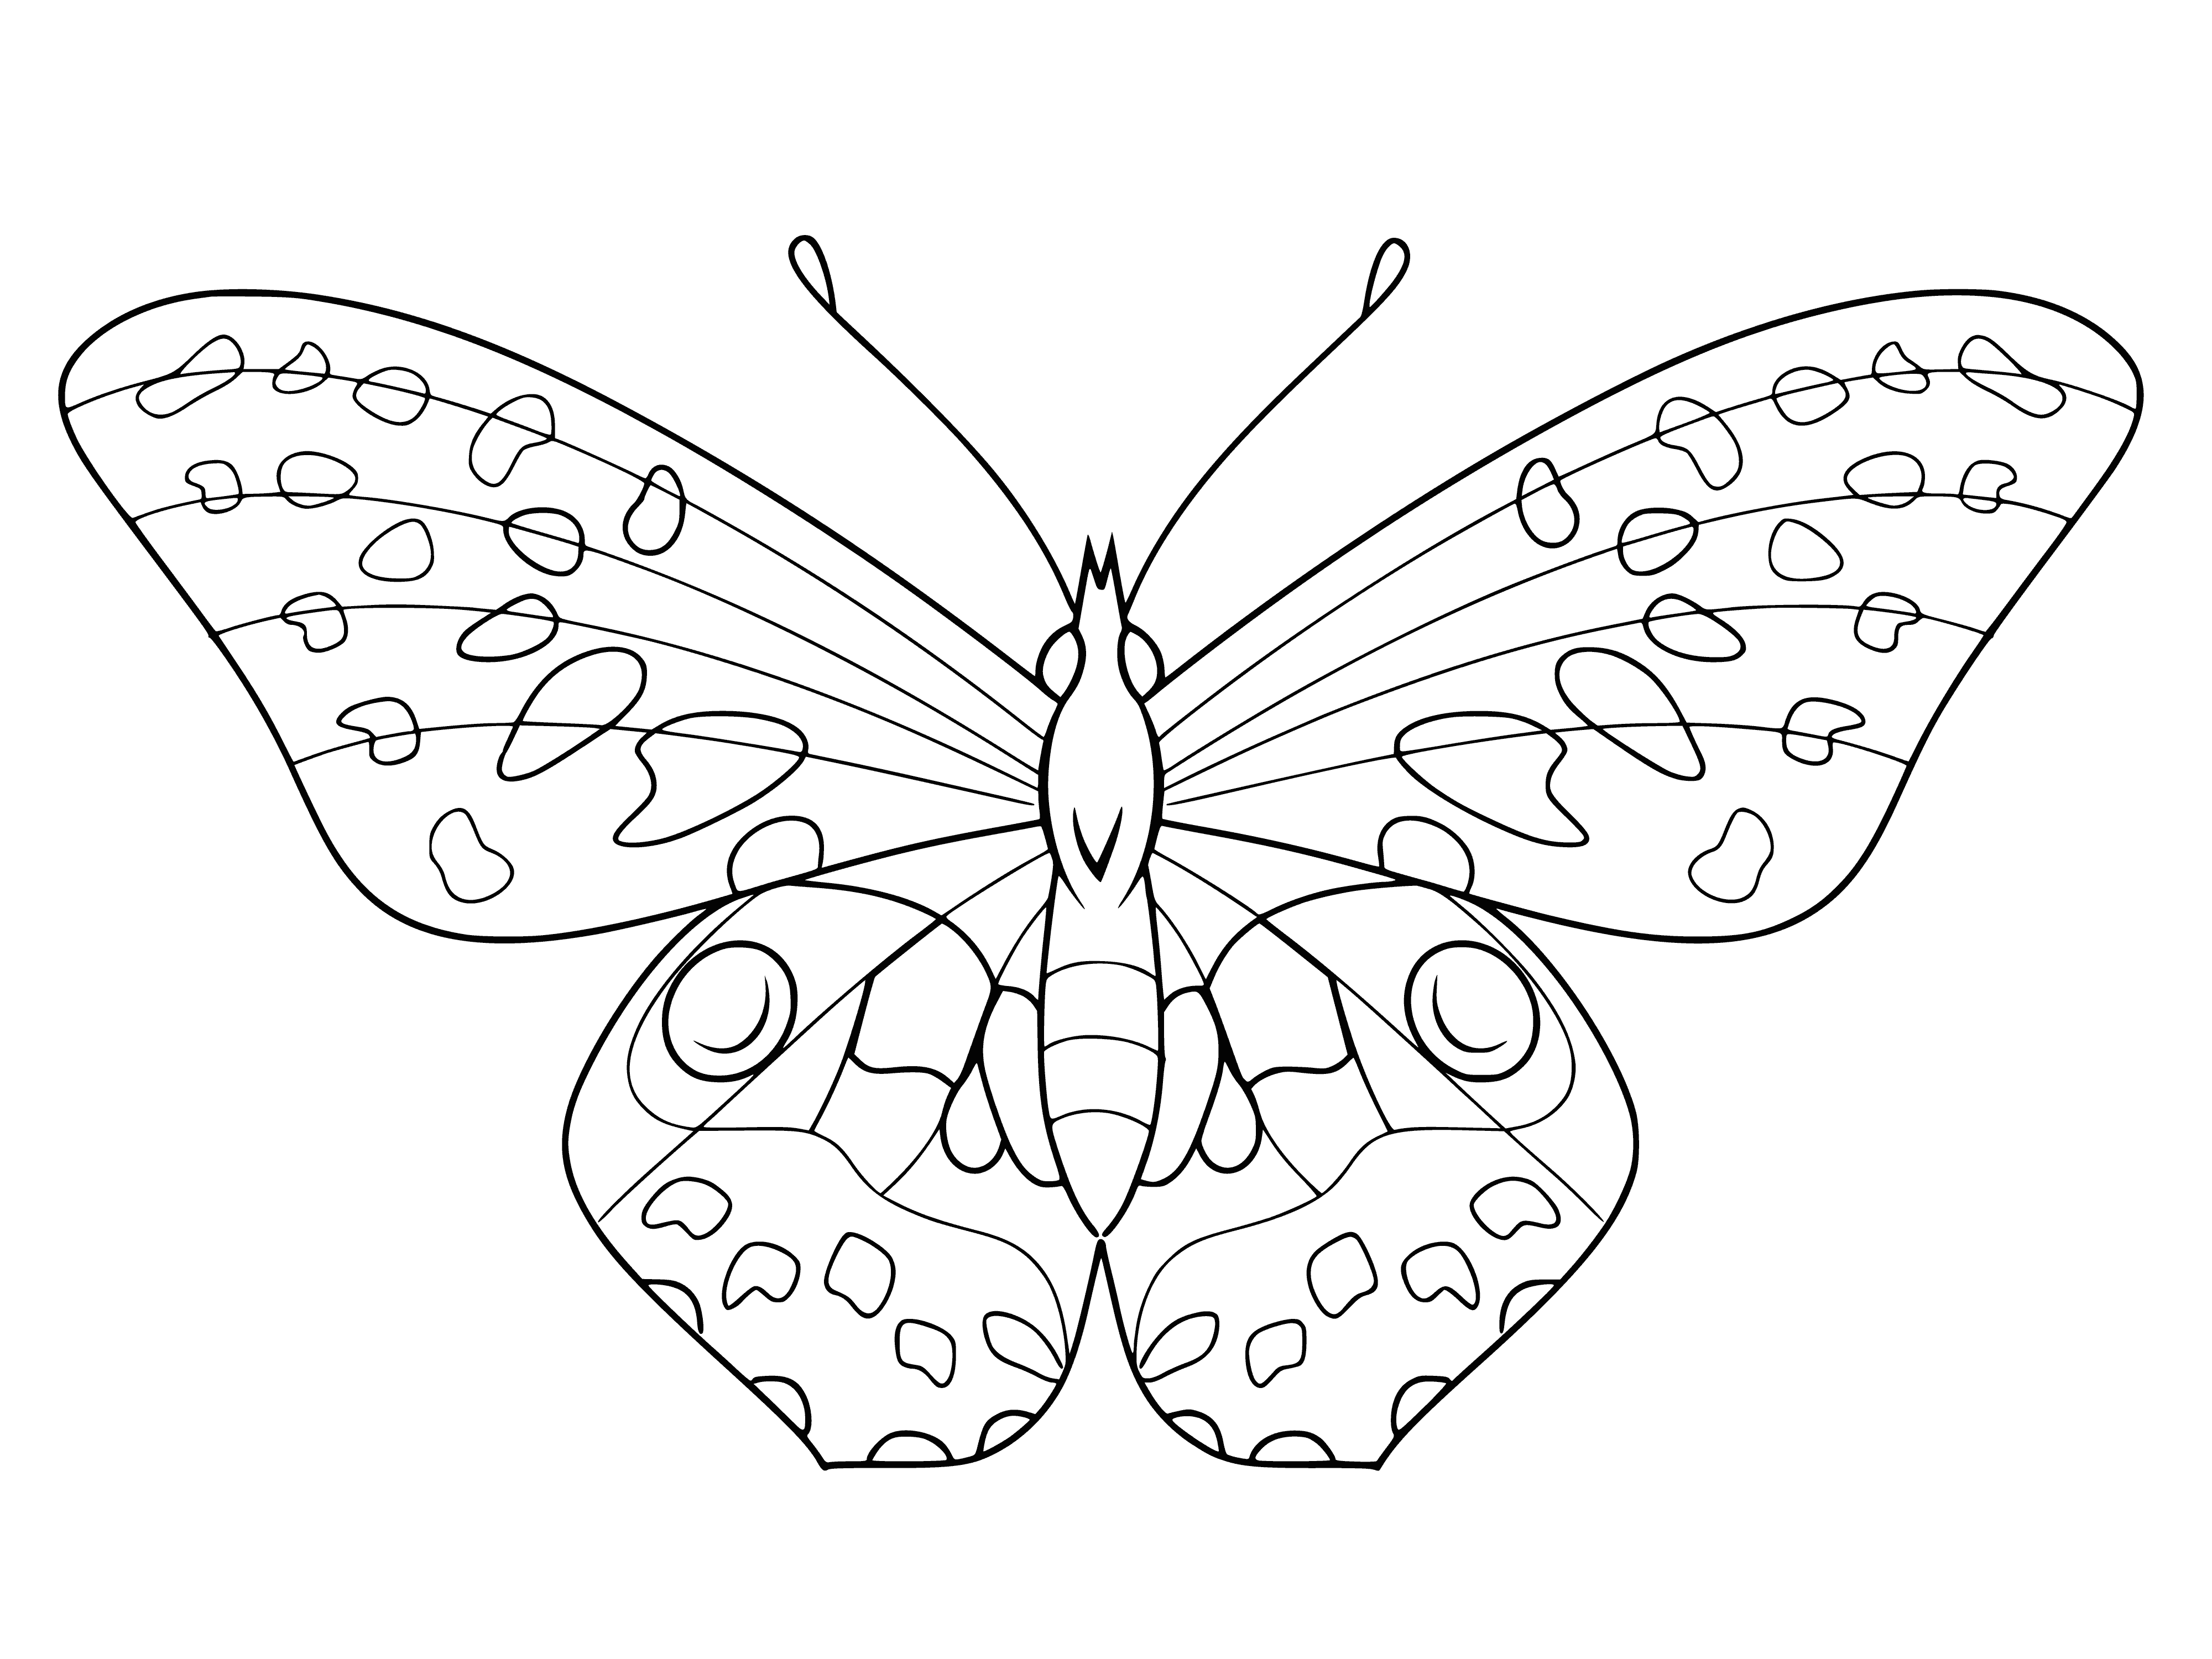 coloring page: -> 3 butterflies in a coloring page: 1 orange/black spots, 1 yellow/black stripes, 1 black/white spots, flying around a flower.